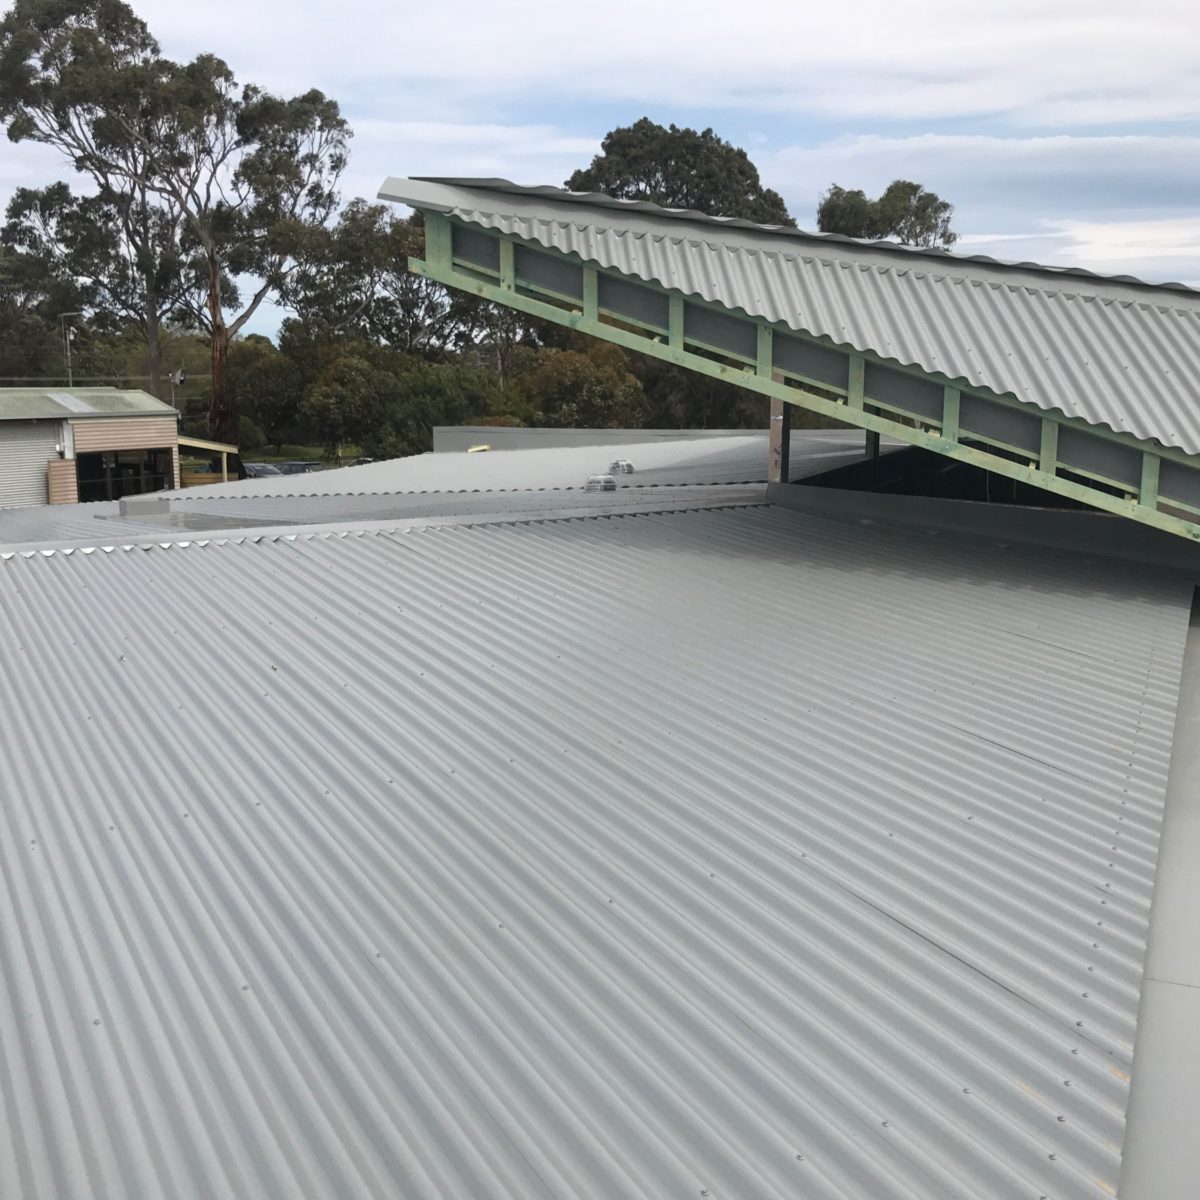 Buckland Roofing | Commercial & Residential Roof Plumbers Melbourne | Metal Roofing & Wall Cladding | Mornington Peninsula, Frankston, Carrum Downs, South Easter Suburbs & Eastern Suburbs